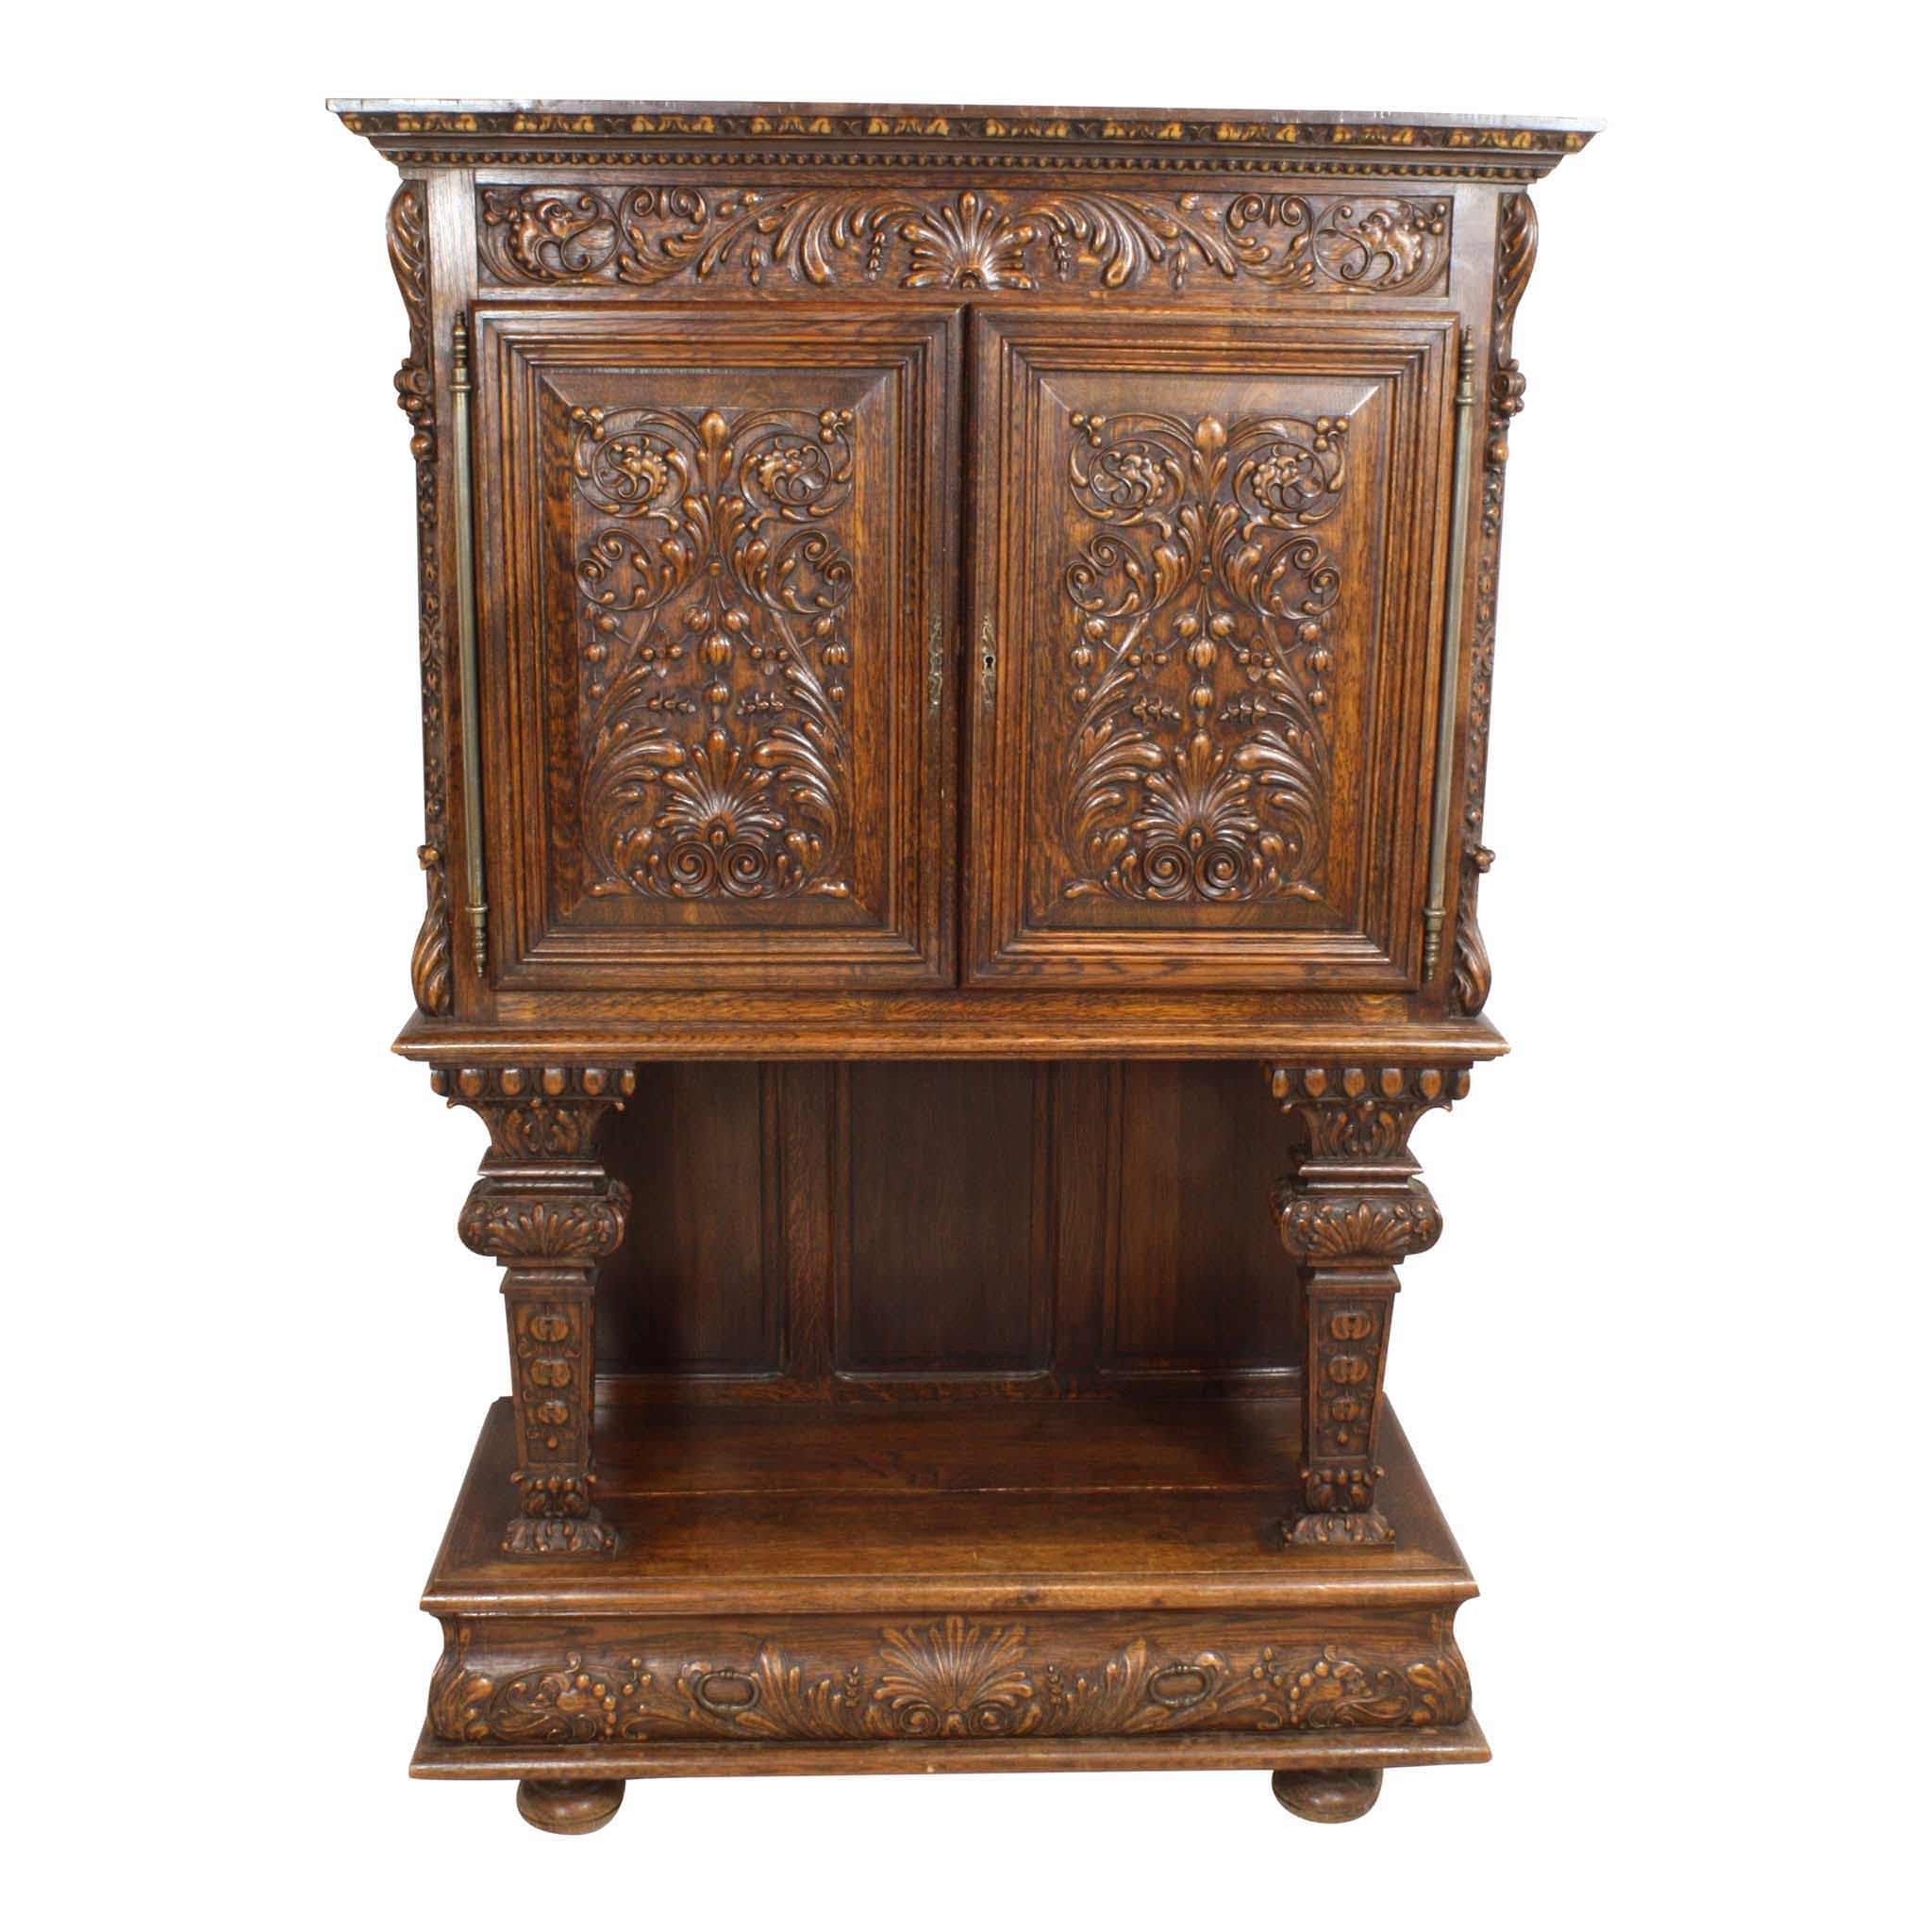 ski-country-antiques - English Carved Oak Cabinet